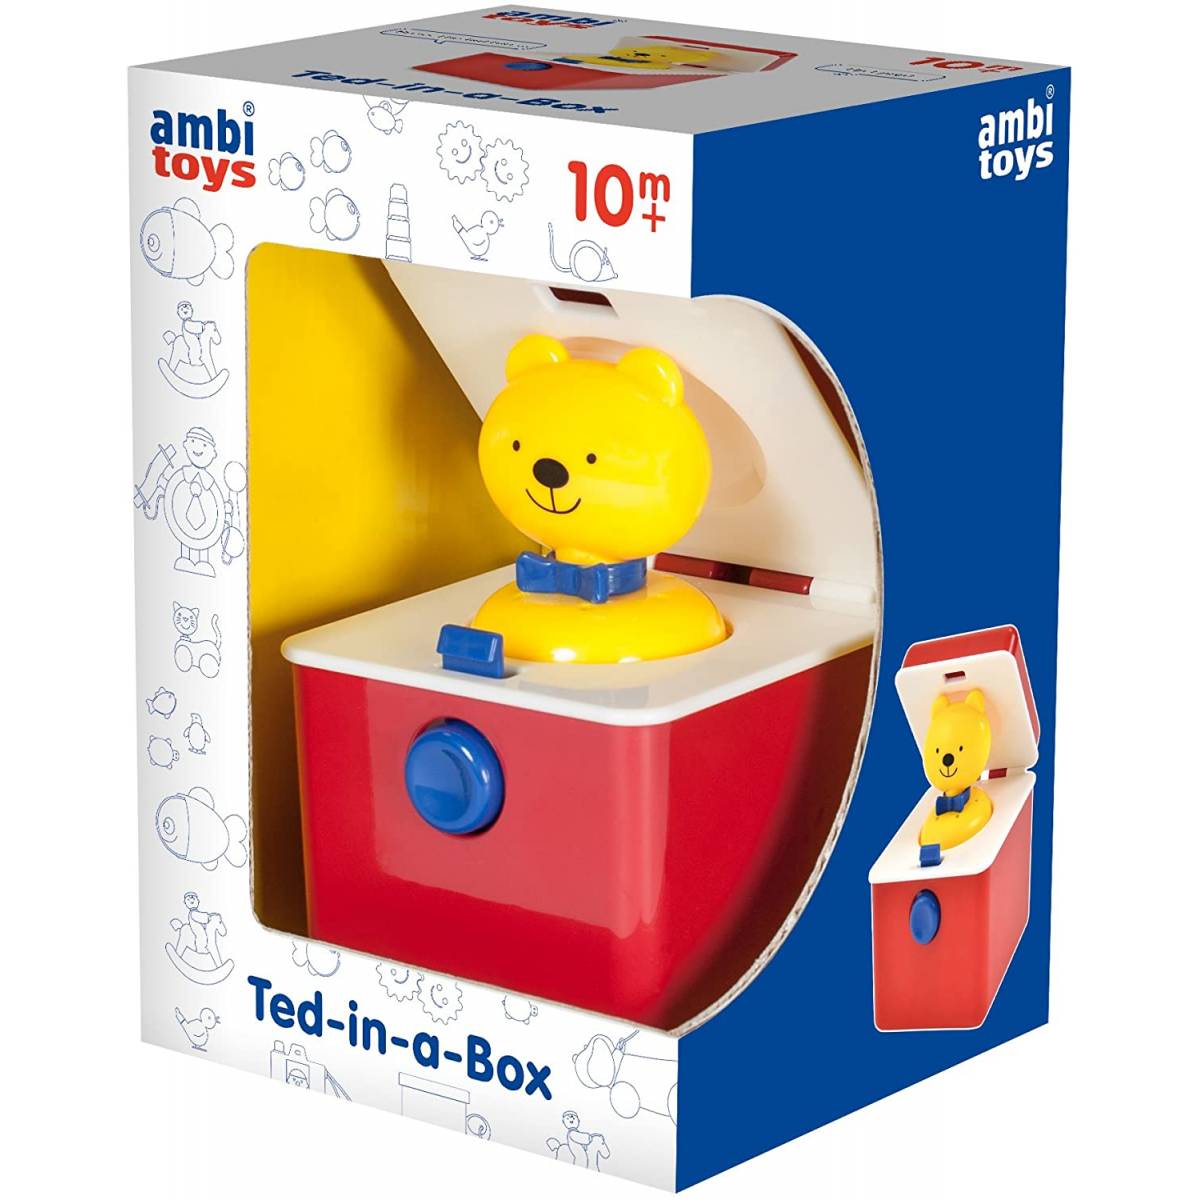 Ted-in-a-Box